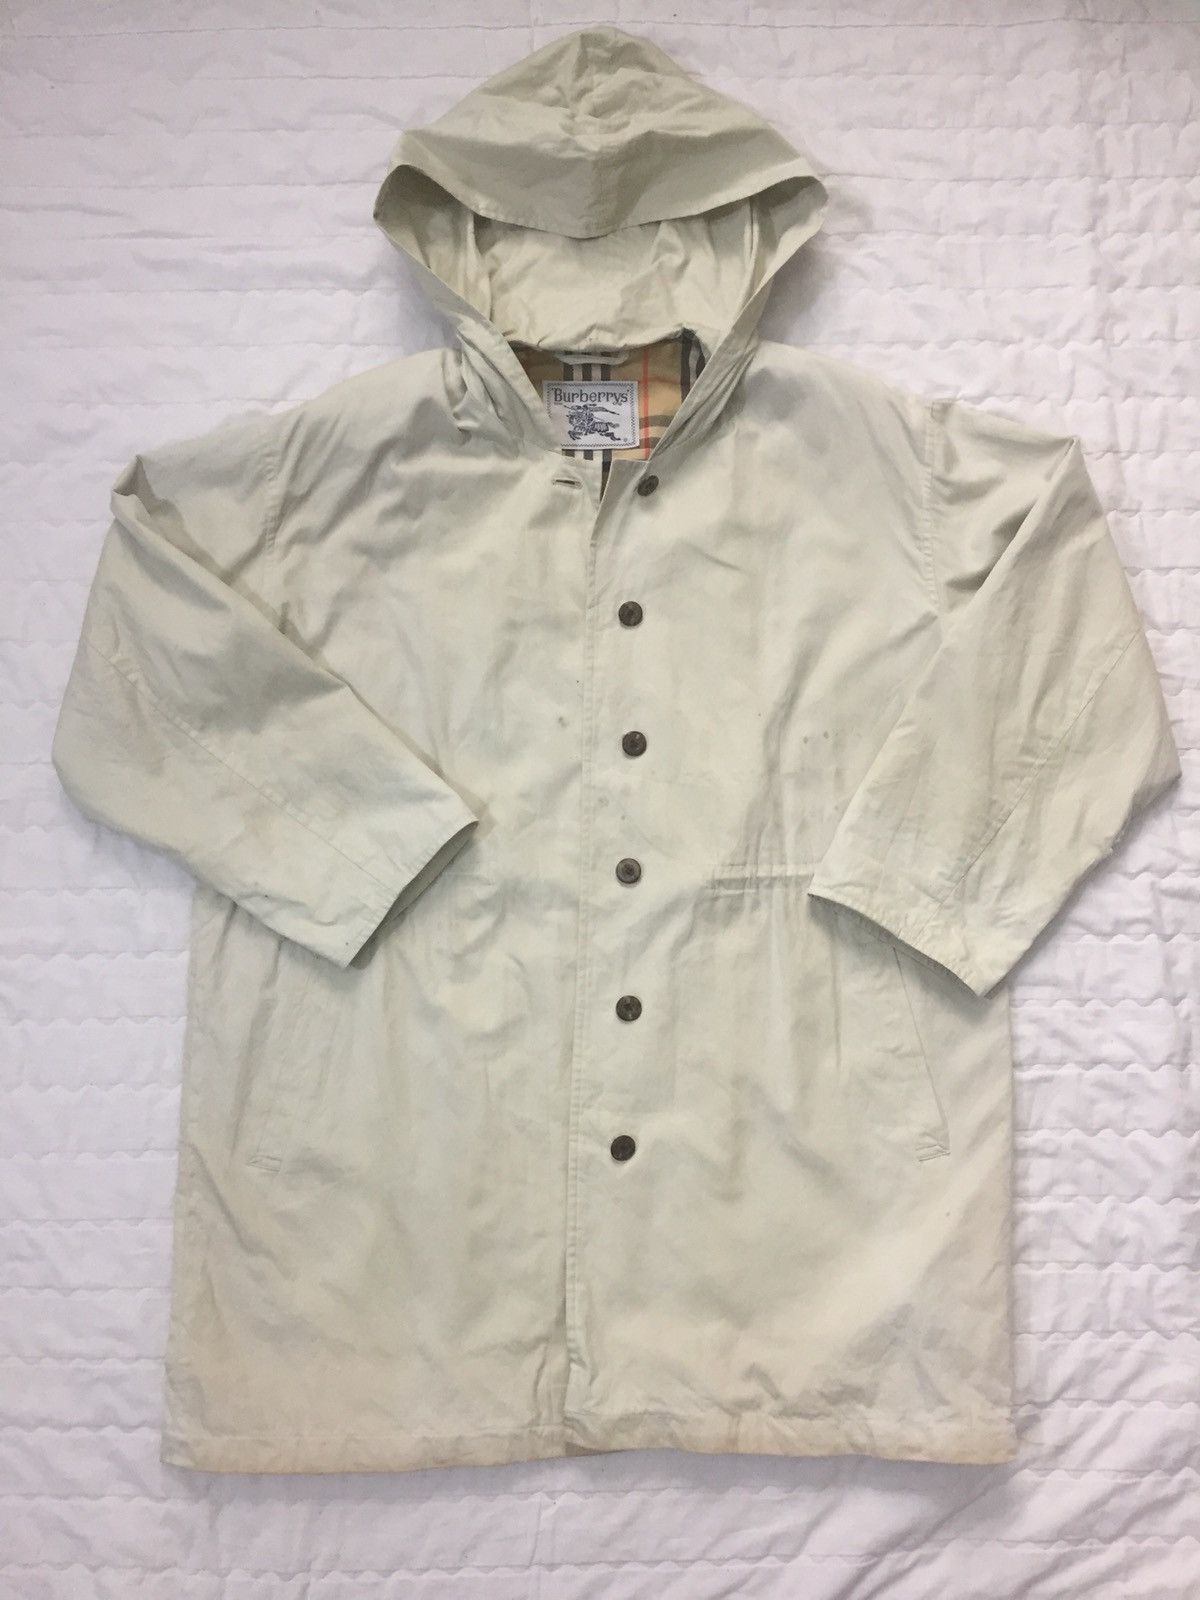 Burberry Burberrys’ Hoodies Trench Coat Size US M / EU 48-50 / 2 - 2 Preview